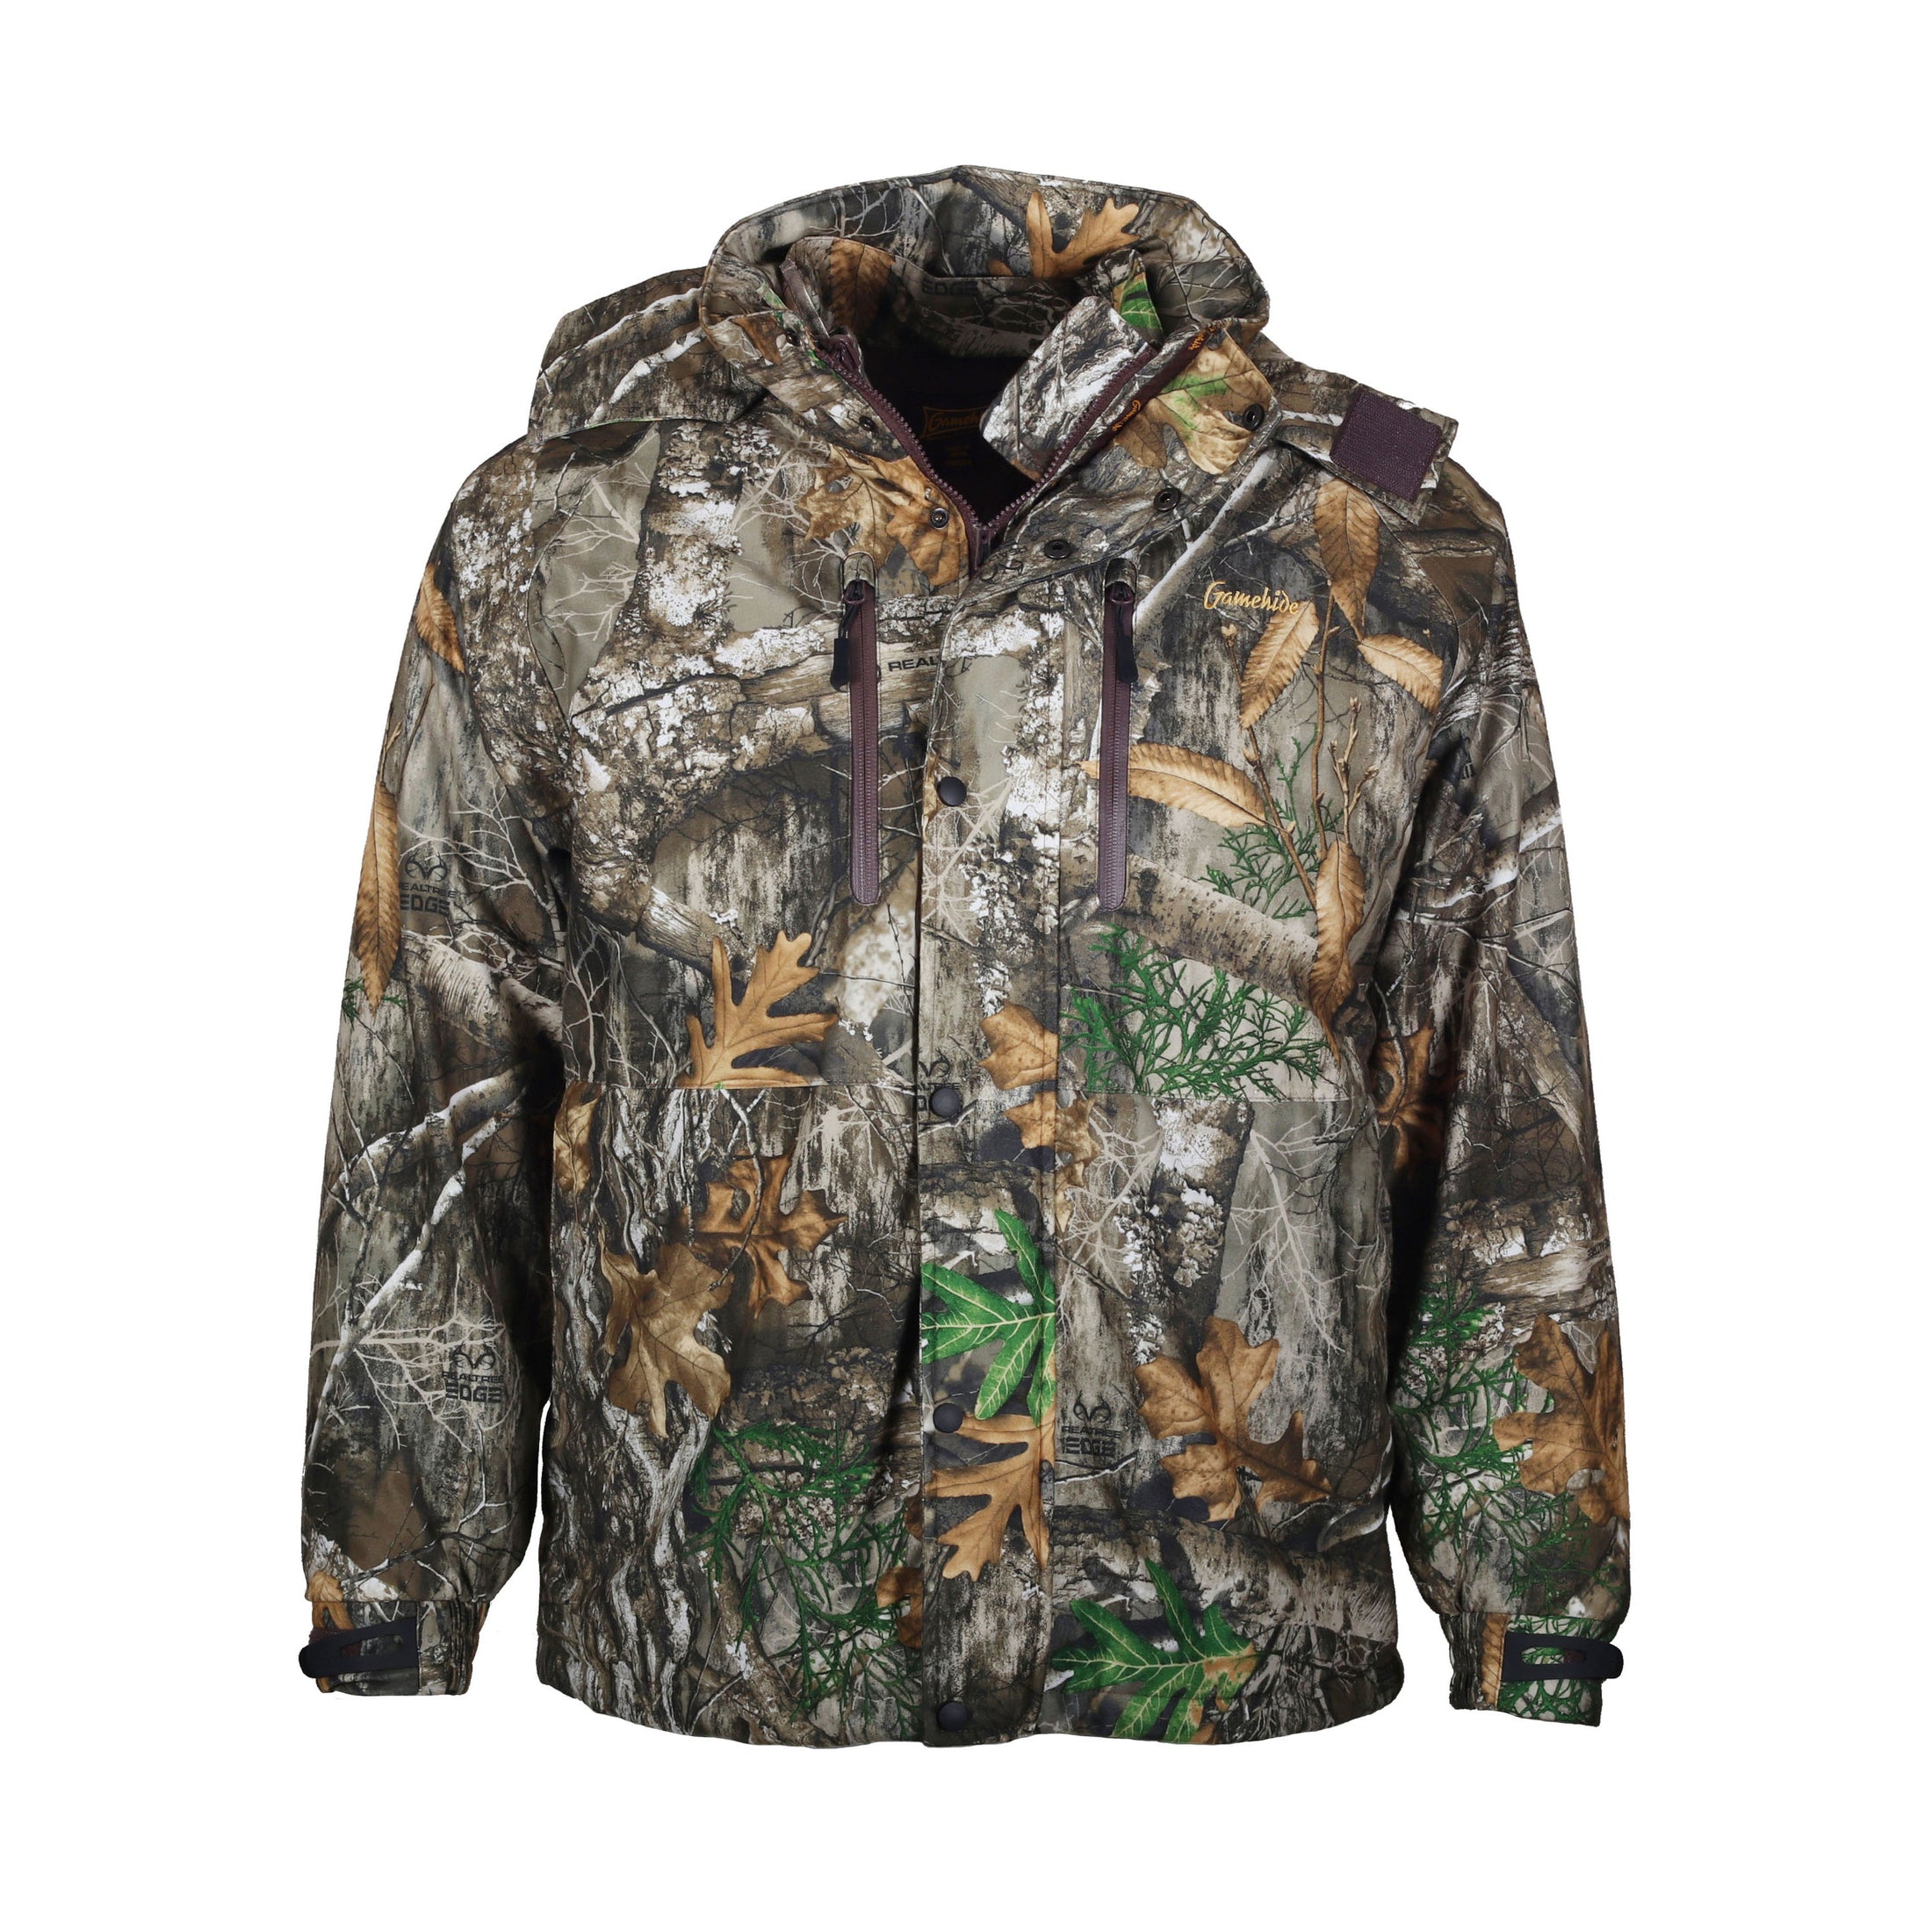 gamehide wild systems parka front view (realtree edge)